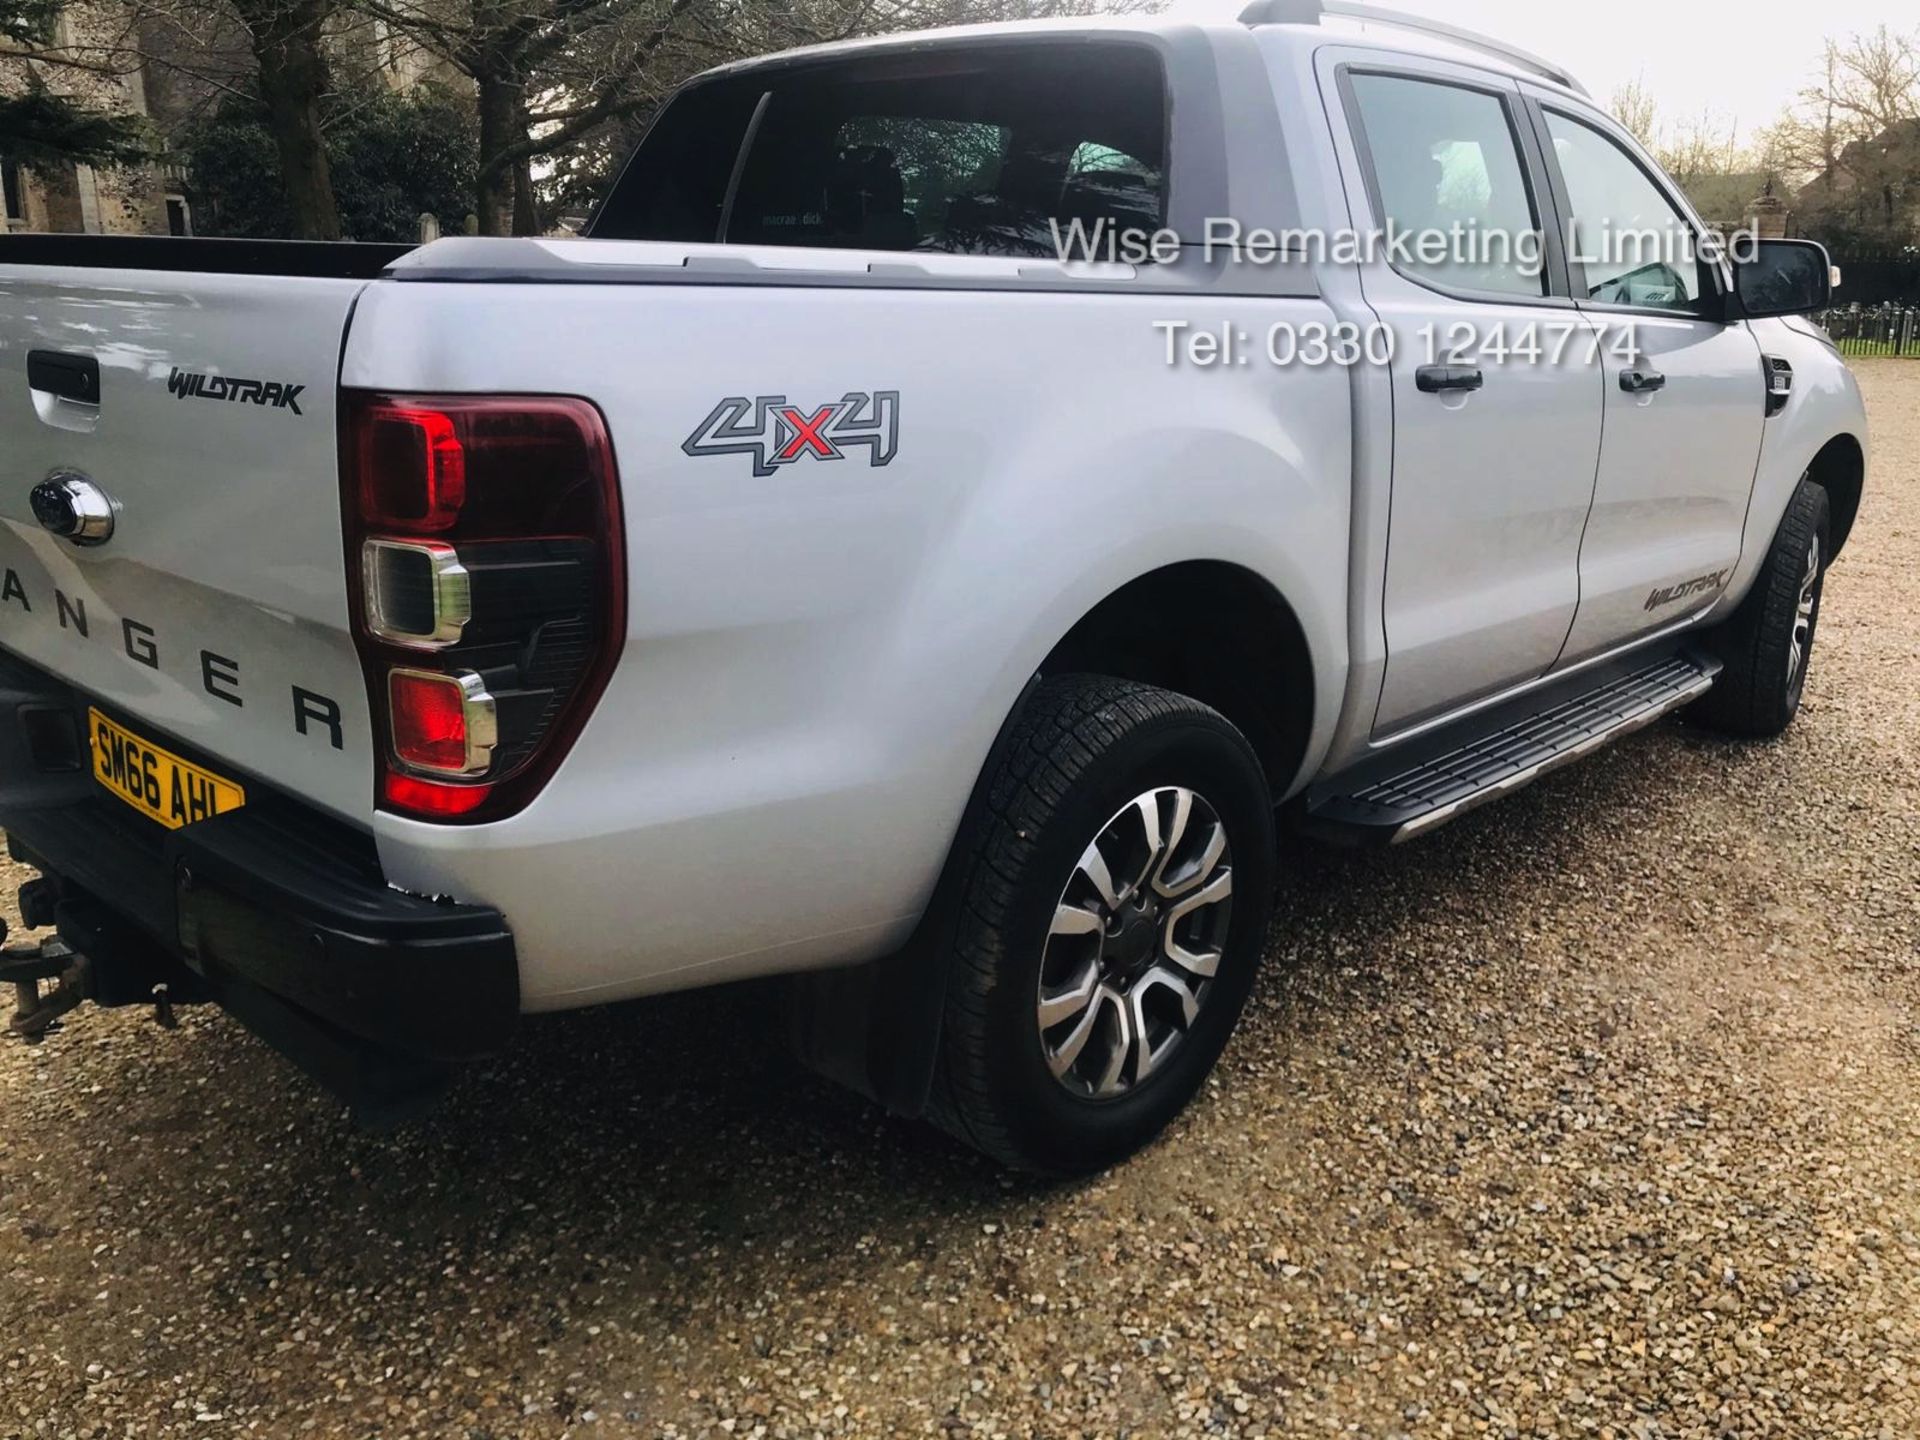 Ford Ranger 3.2 TDCI WILDTRAK - Auto - 2017 Model - 1 Former Keeper - 4x4 - TOP OF THE RANGE - Image 5 of 16